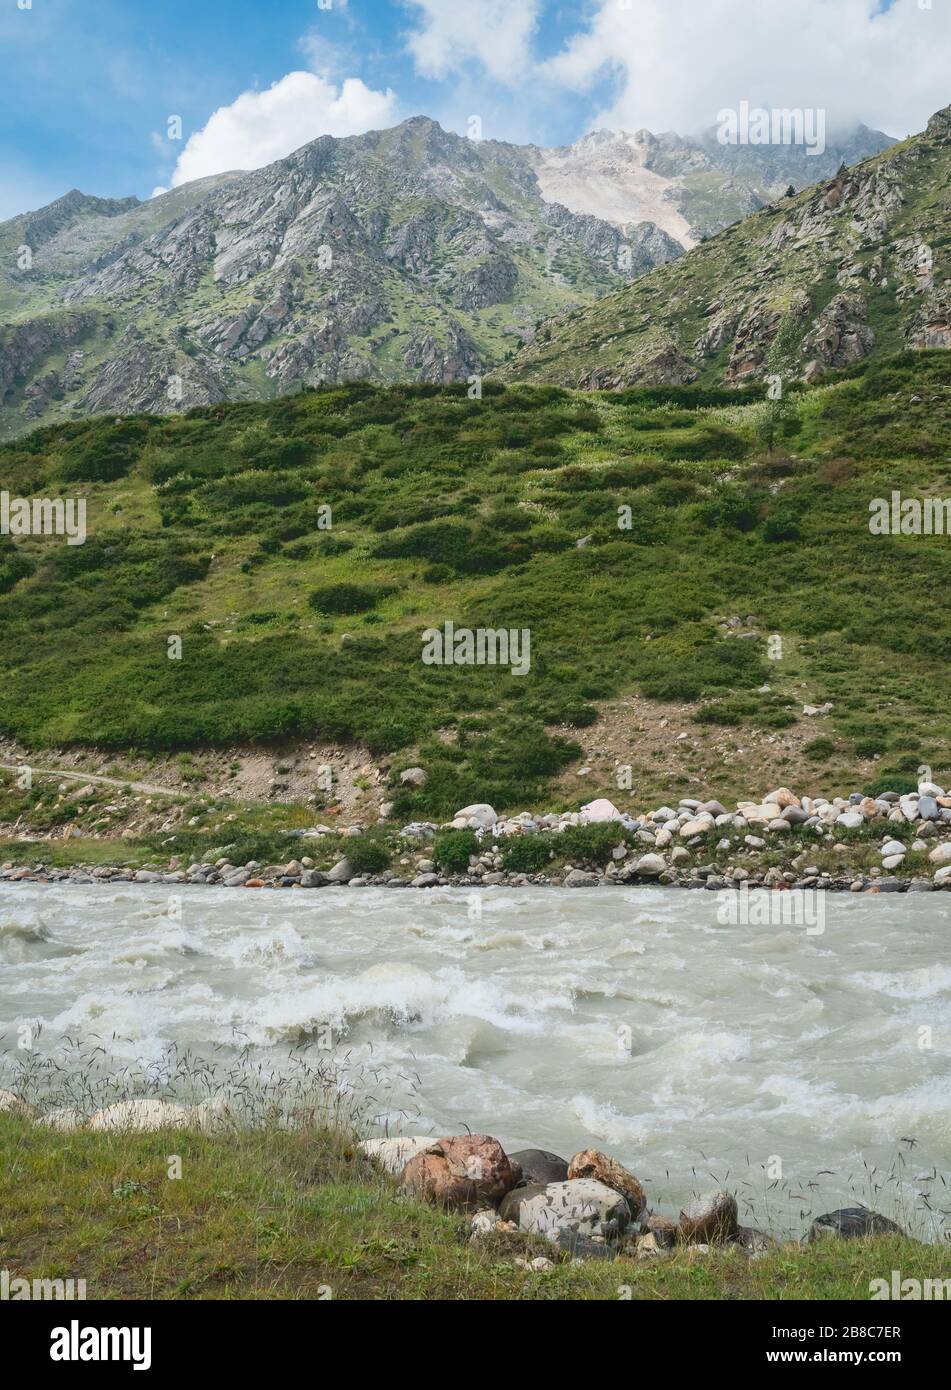 View across the Baspa river towards the Himalayas and rugged, rocky slopes under blue sky in summer near Chitkul, Himachal Pradesh, India. Stock Photo